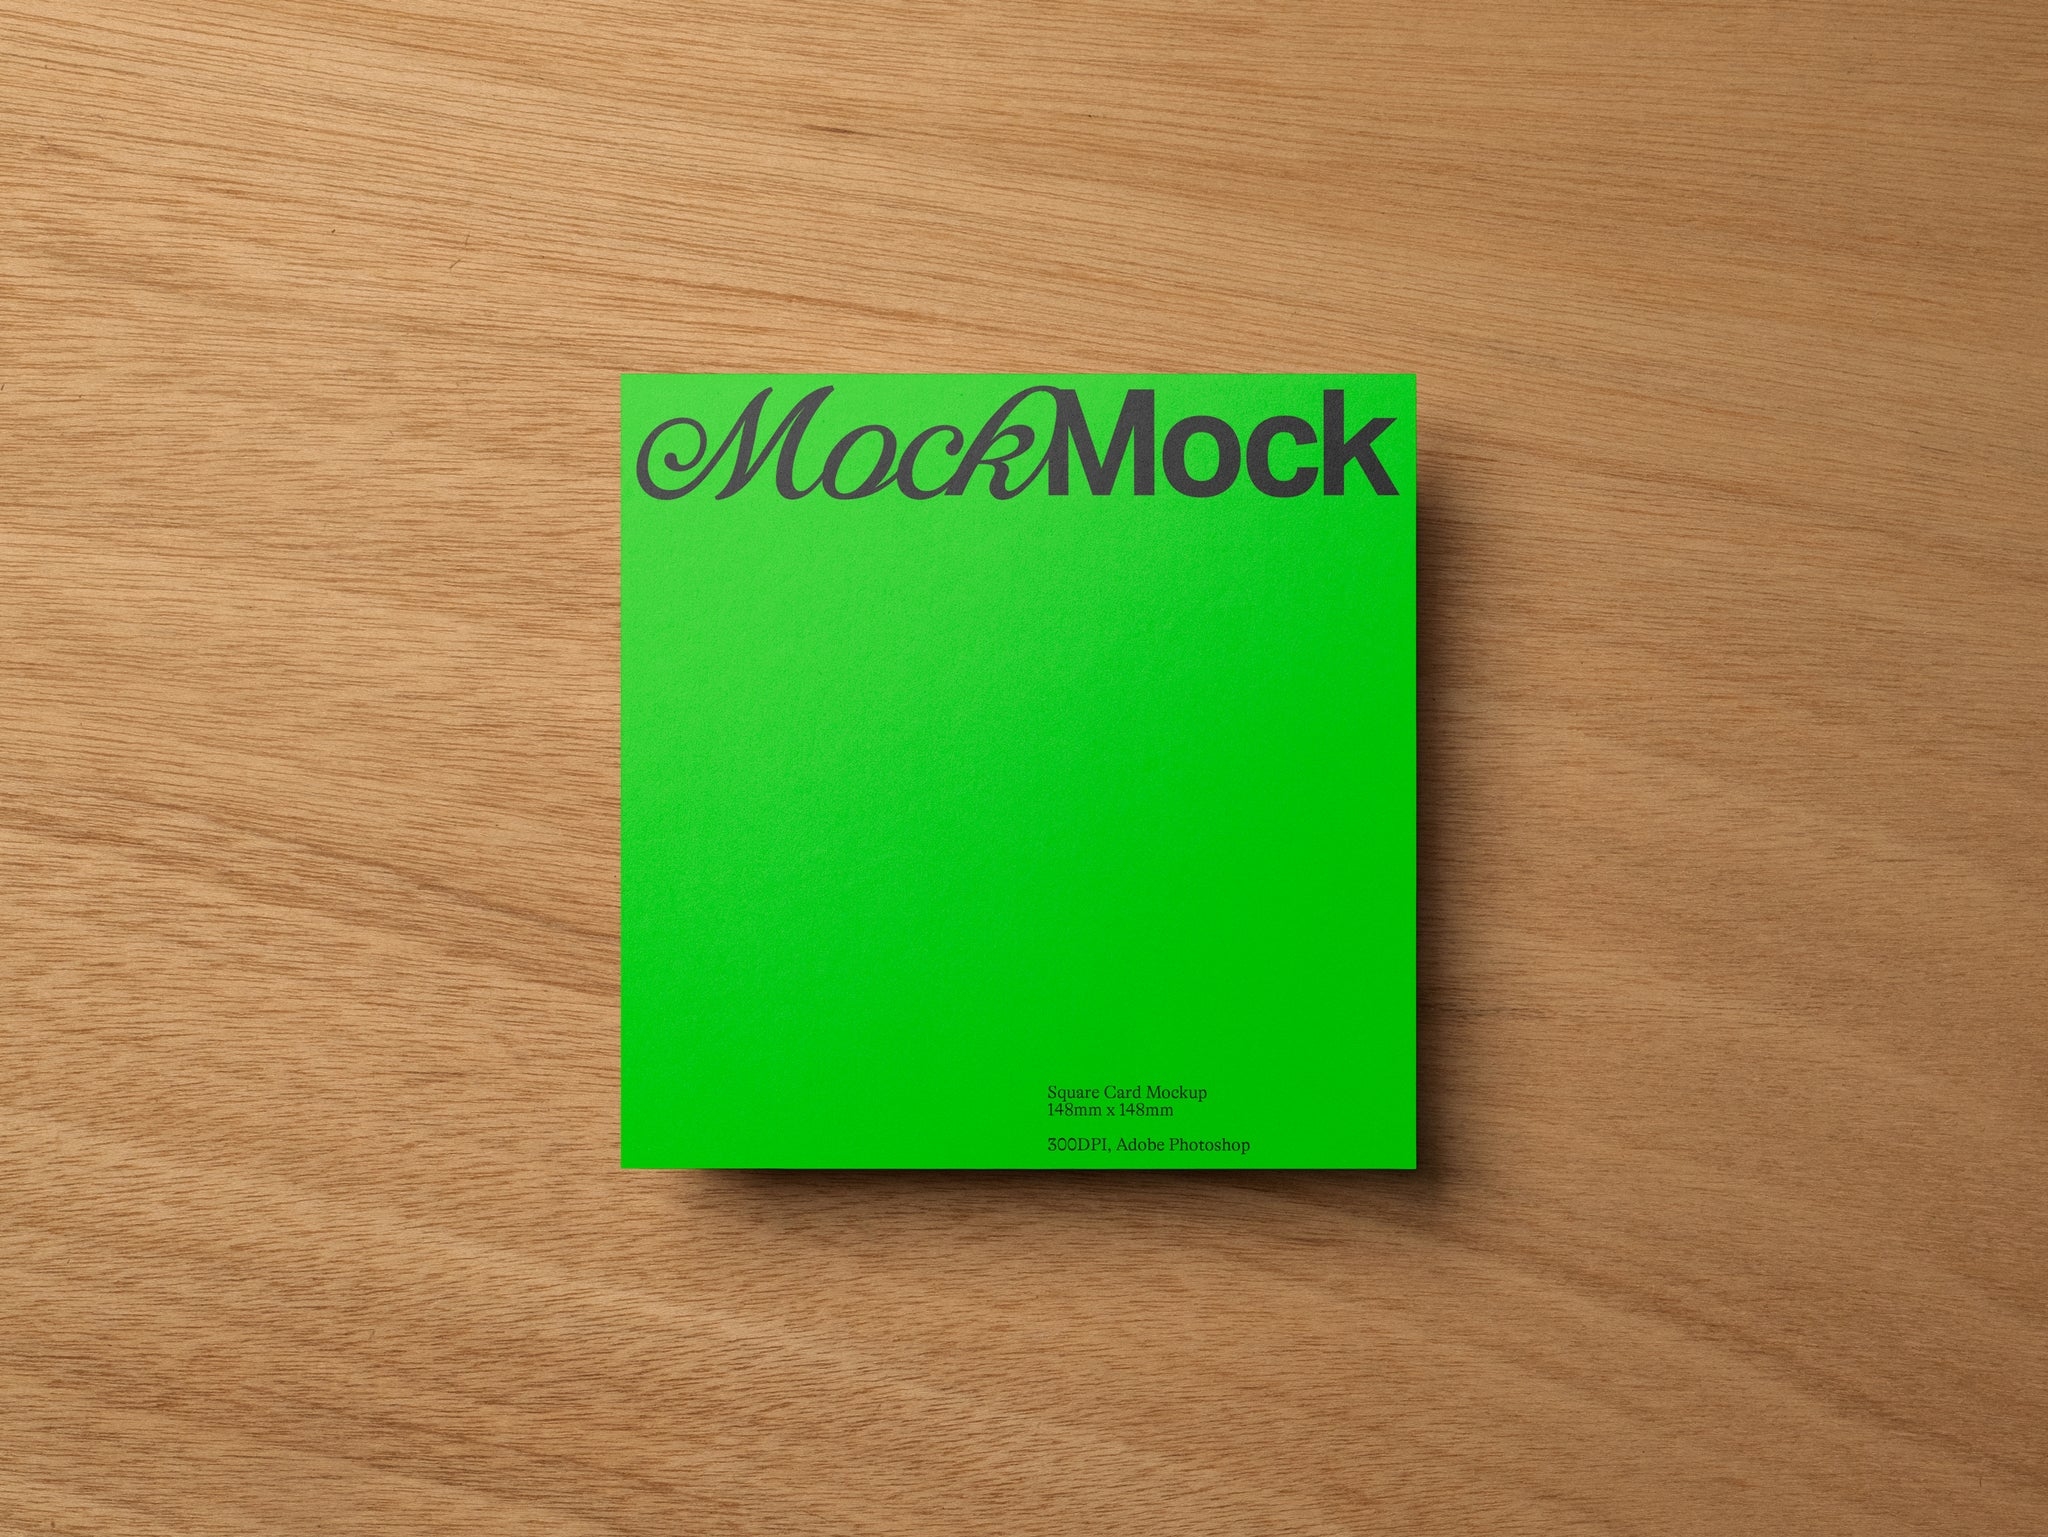 Green Square Print Mockup on a wooden background